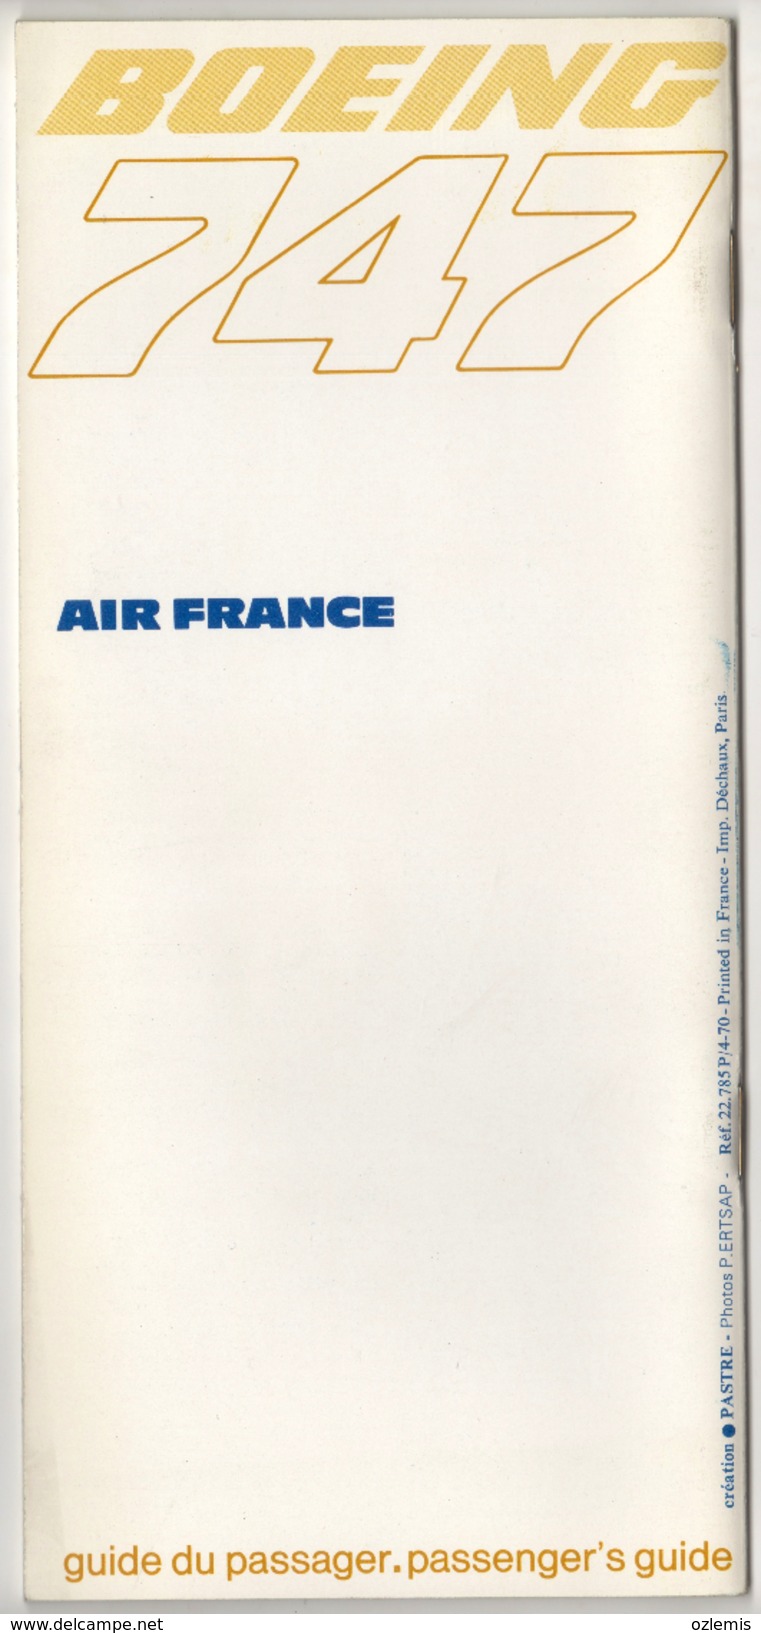 AIR FRANCE AIRLINES BOEING 747 PASSENGER'S GUIDE 27 PAGES - Publicidad